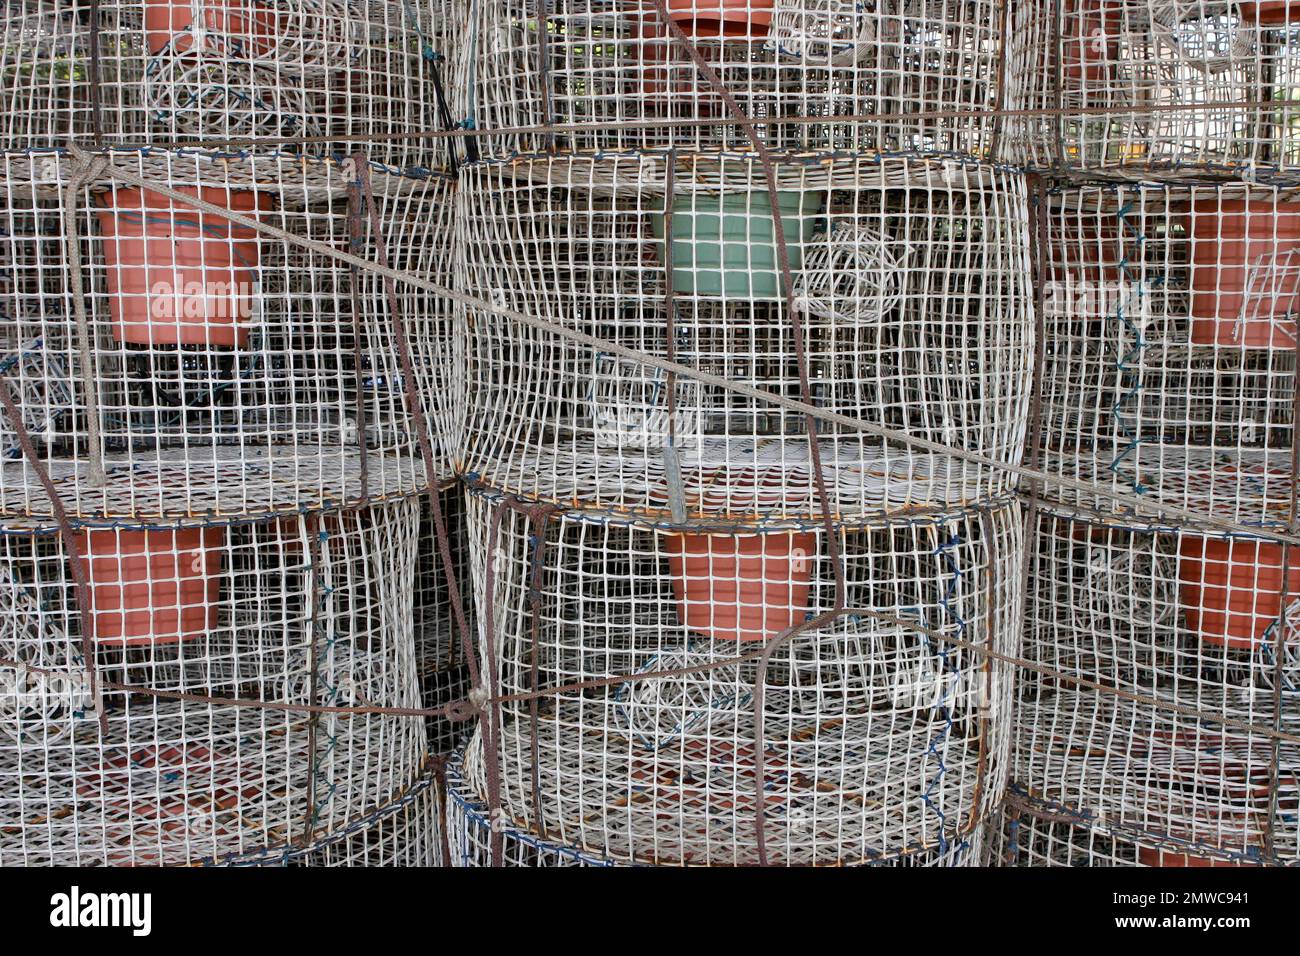 Stacked fish traps with cork buoys, Spain Stock Photo